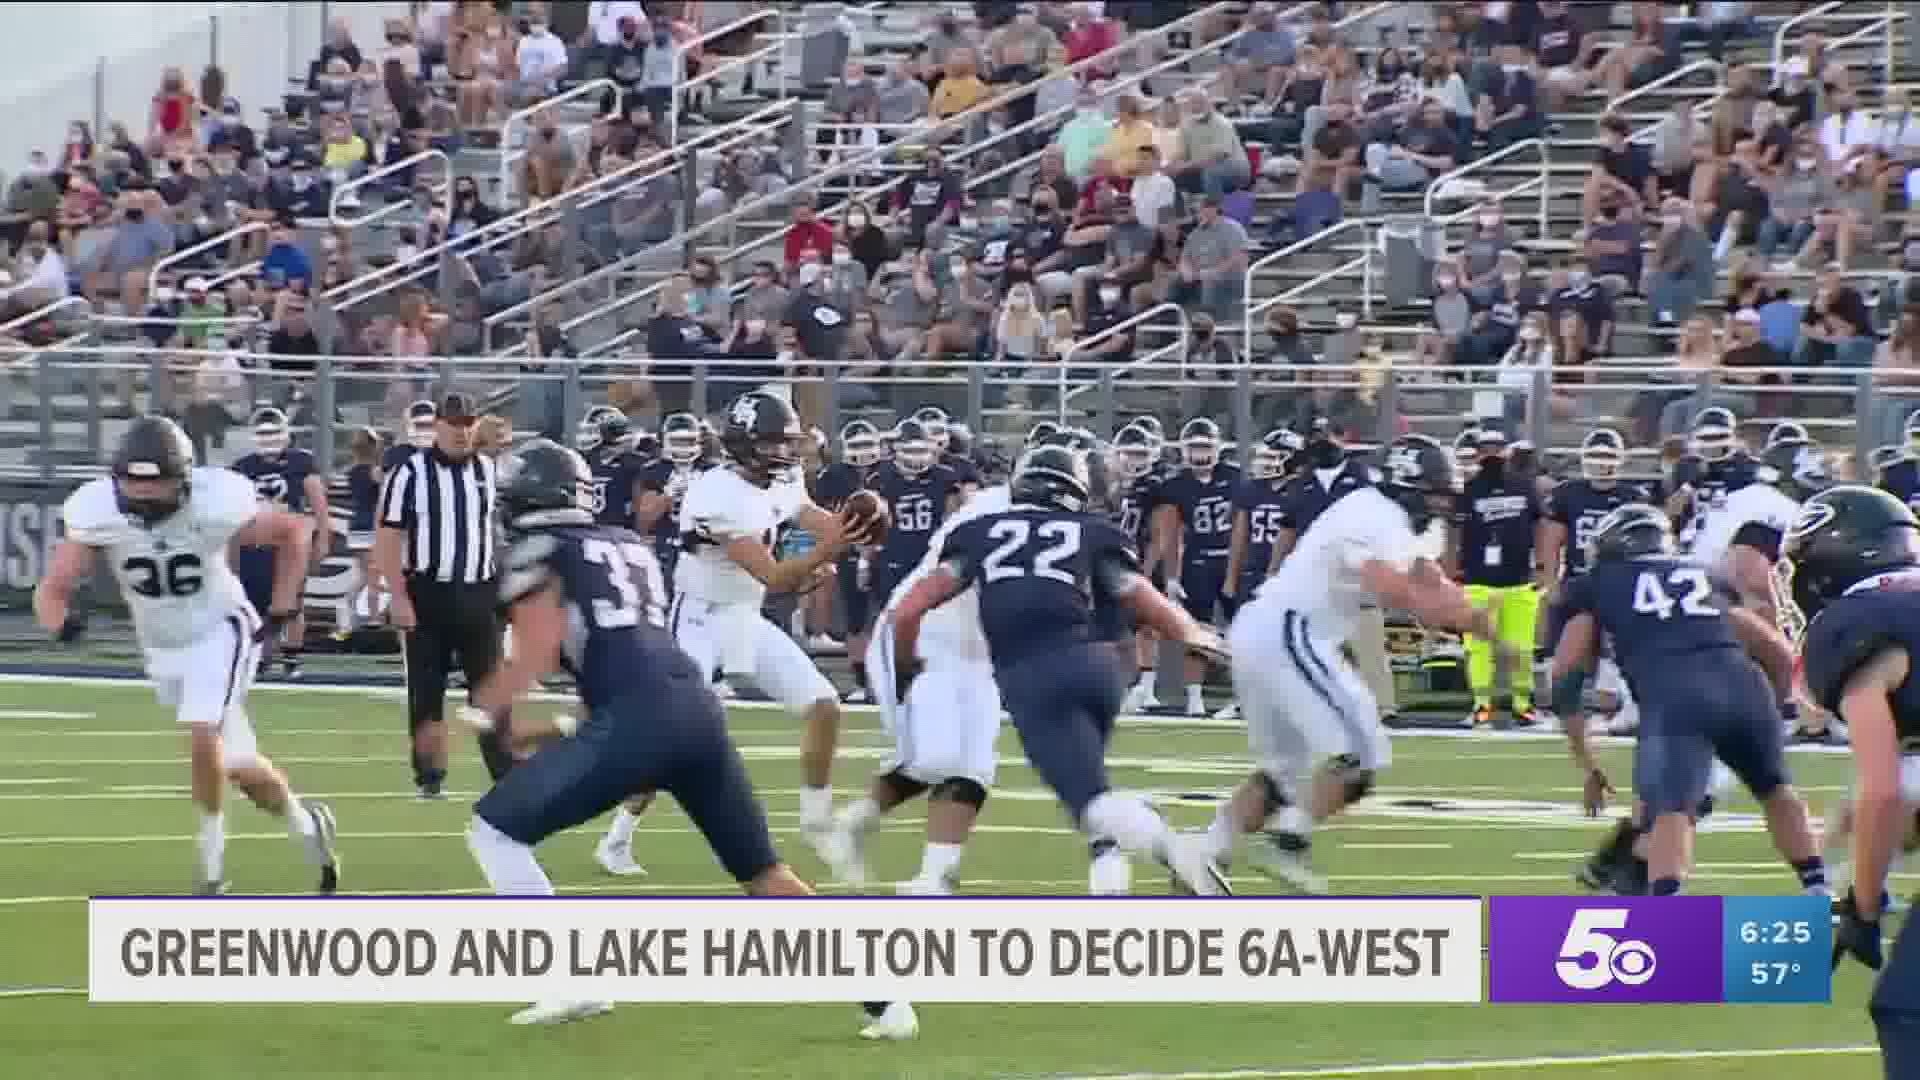 Here's a preview of what you can expect for Week 10 of Football Friday Night.